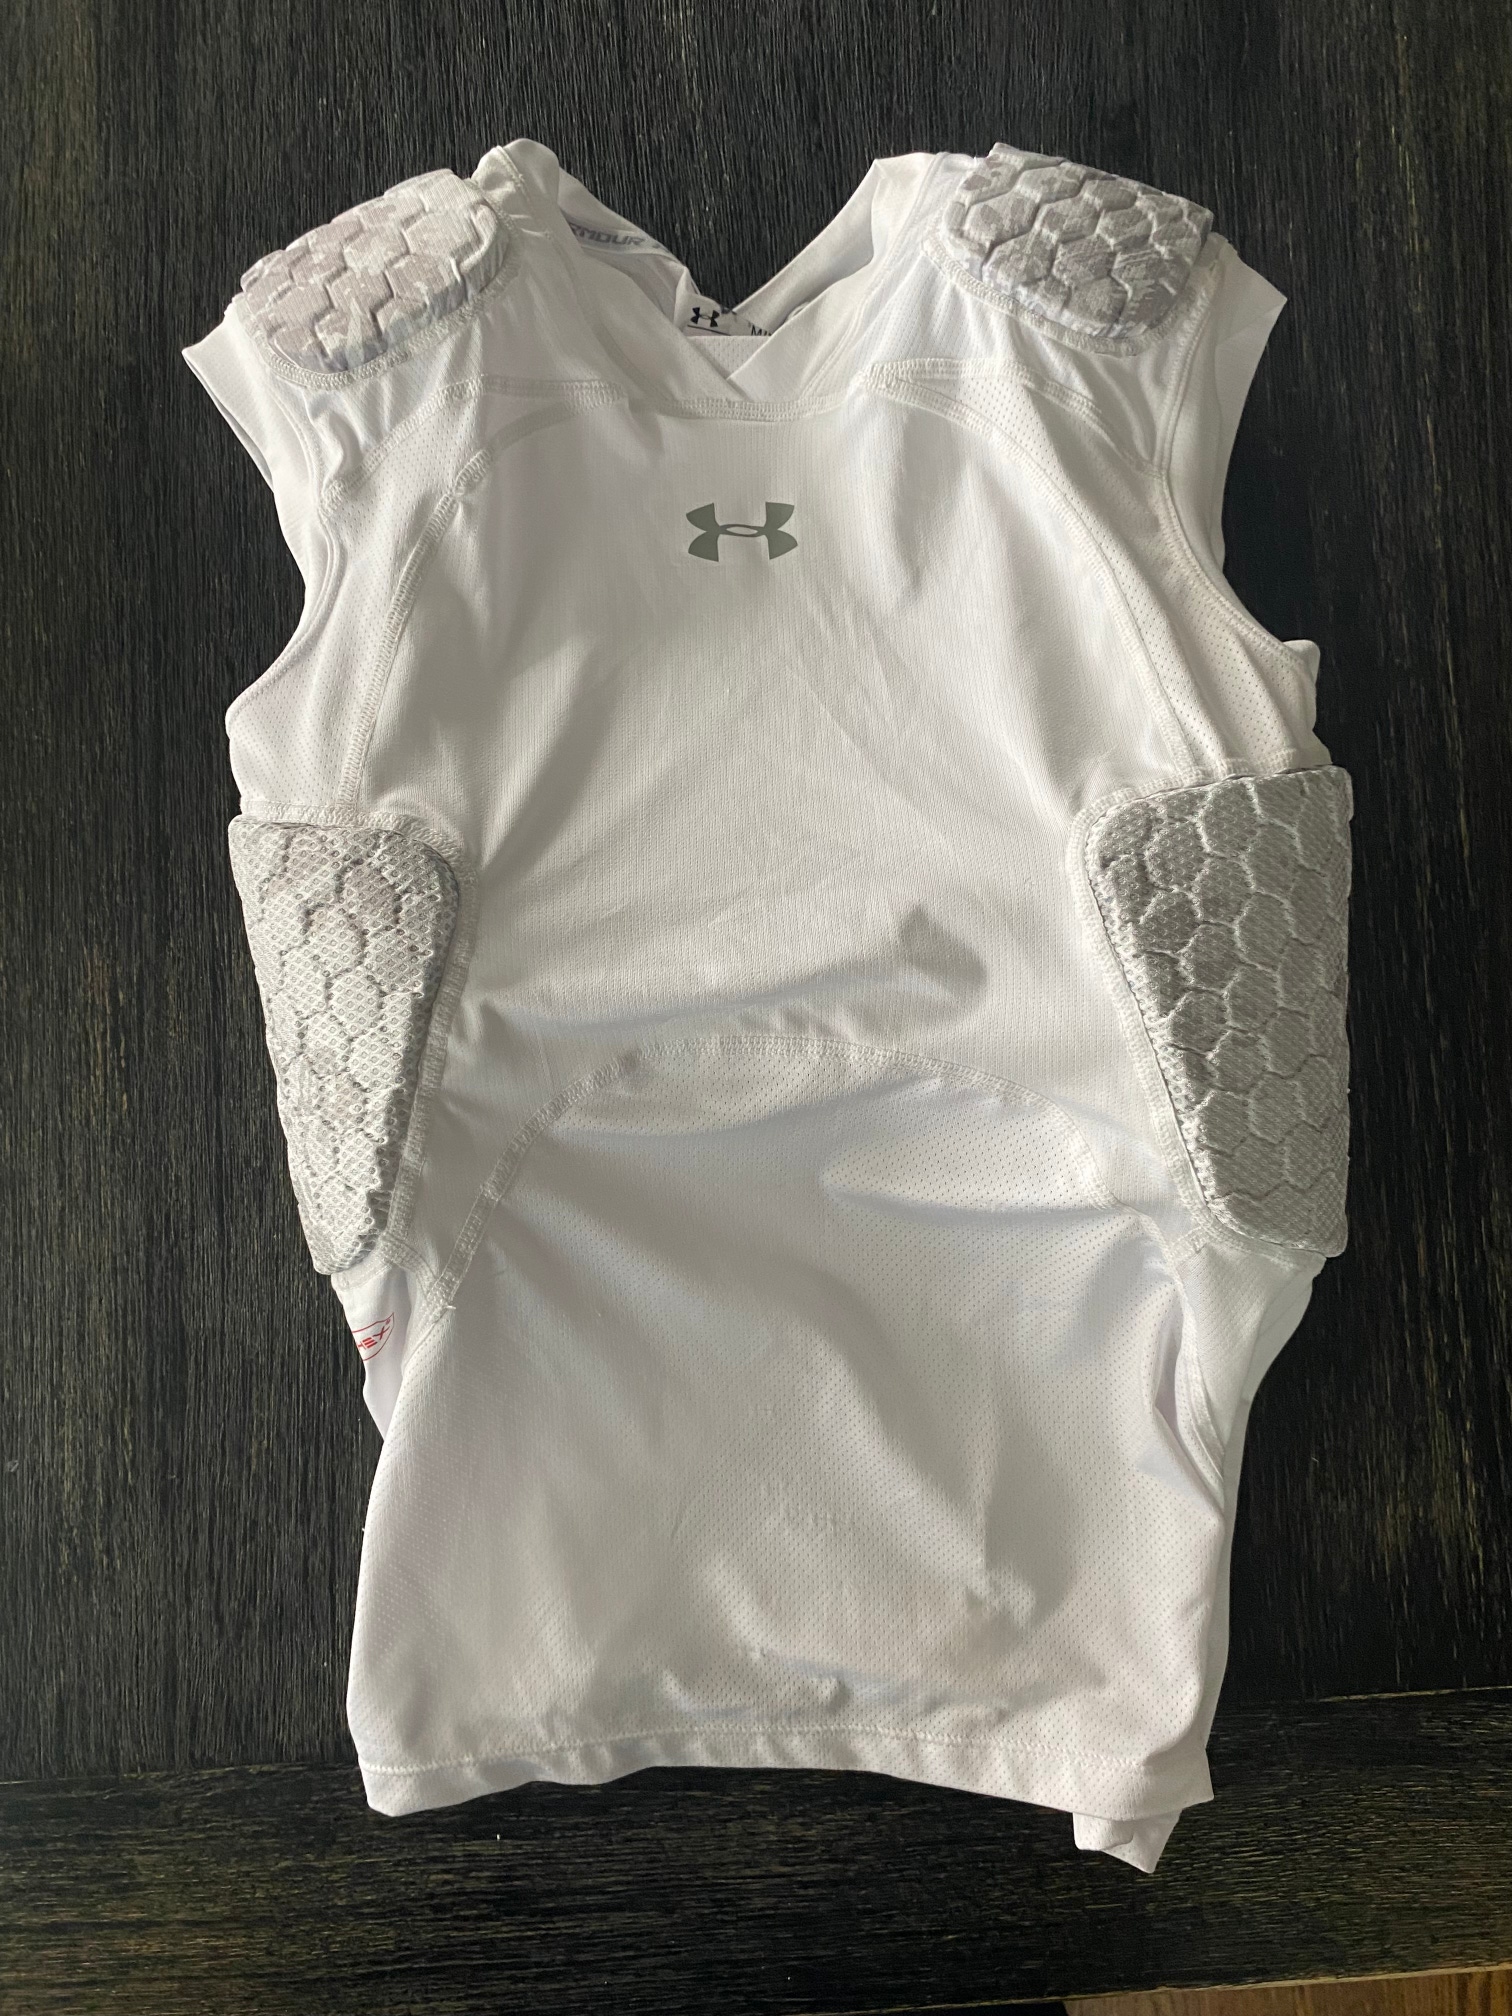 Used Under Armour